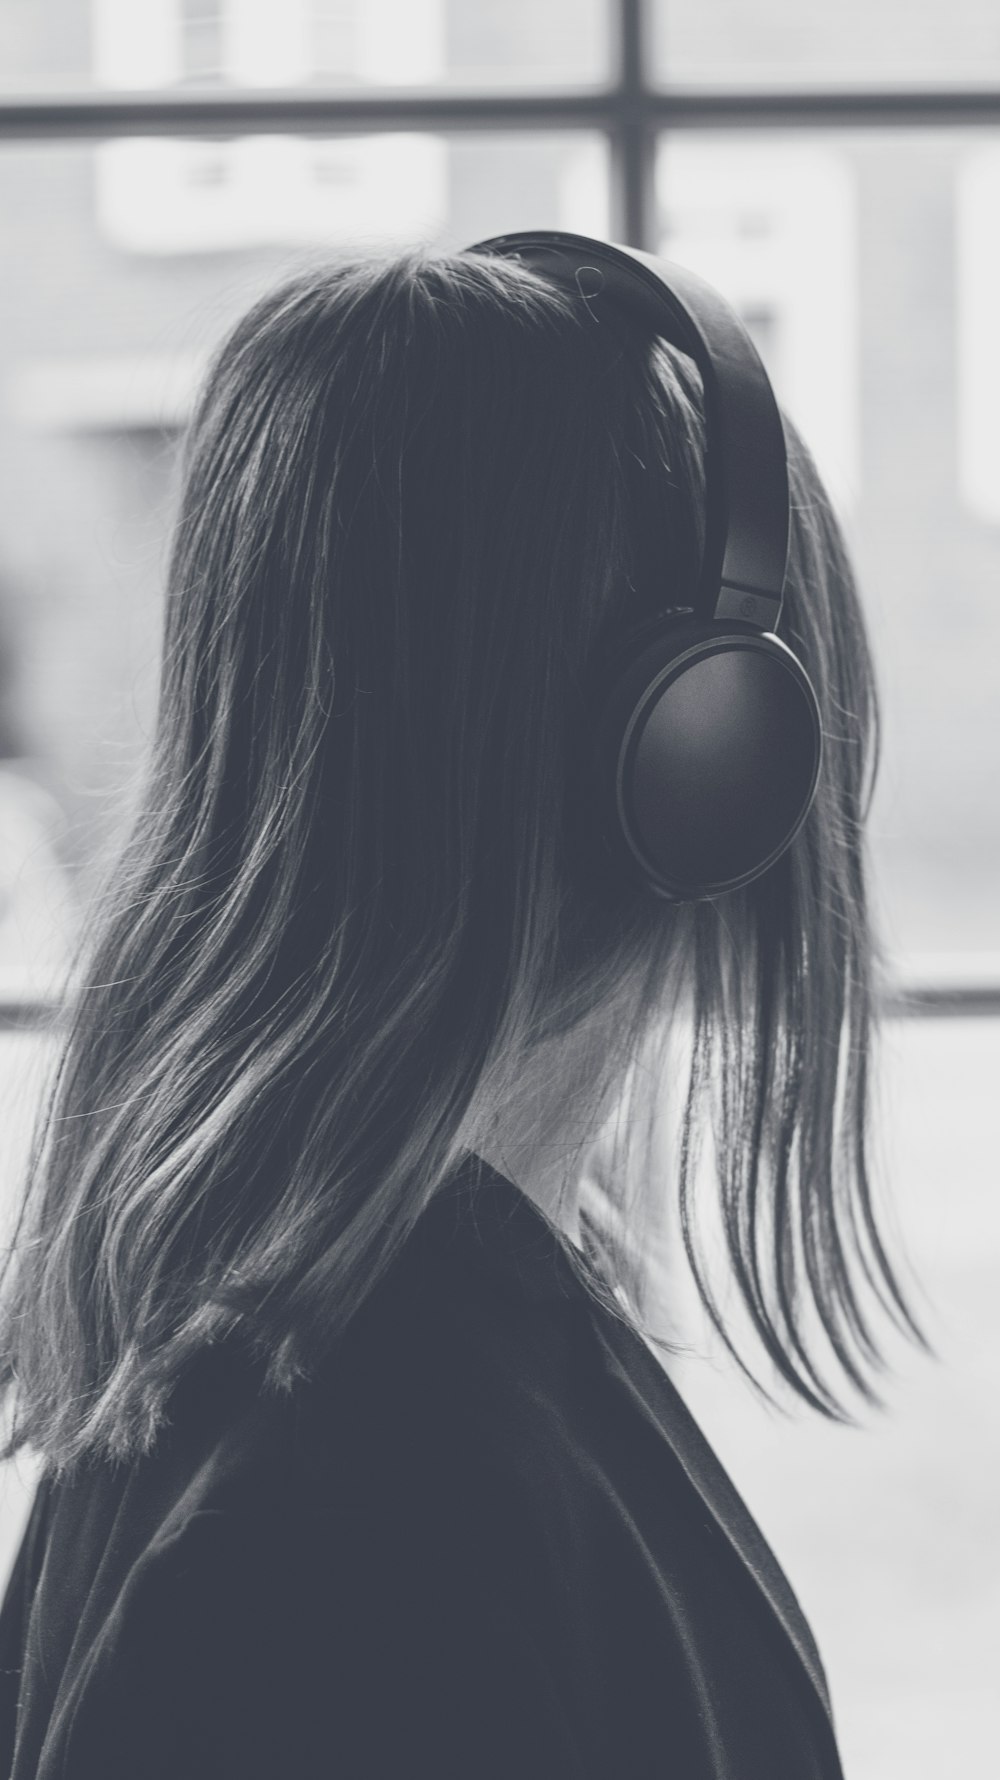 a woman wearing headphones looking out a window